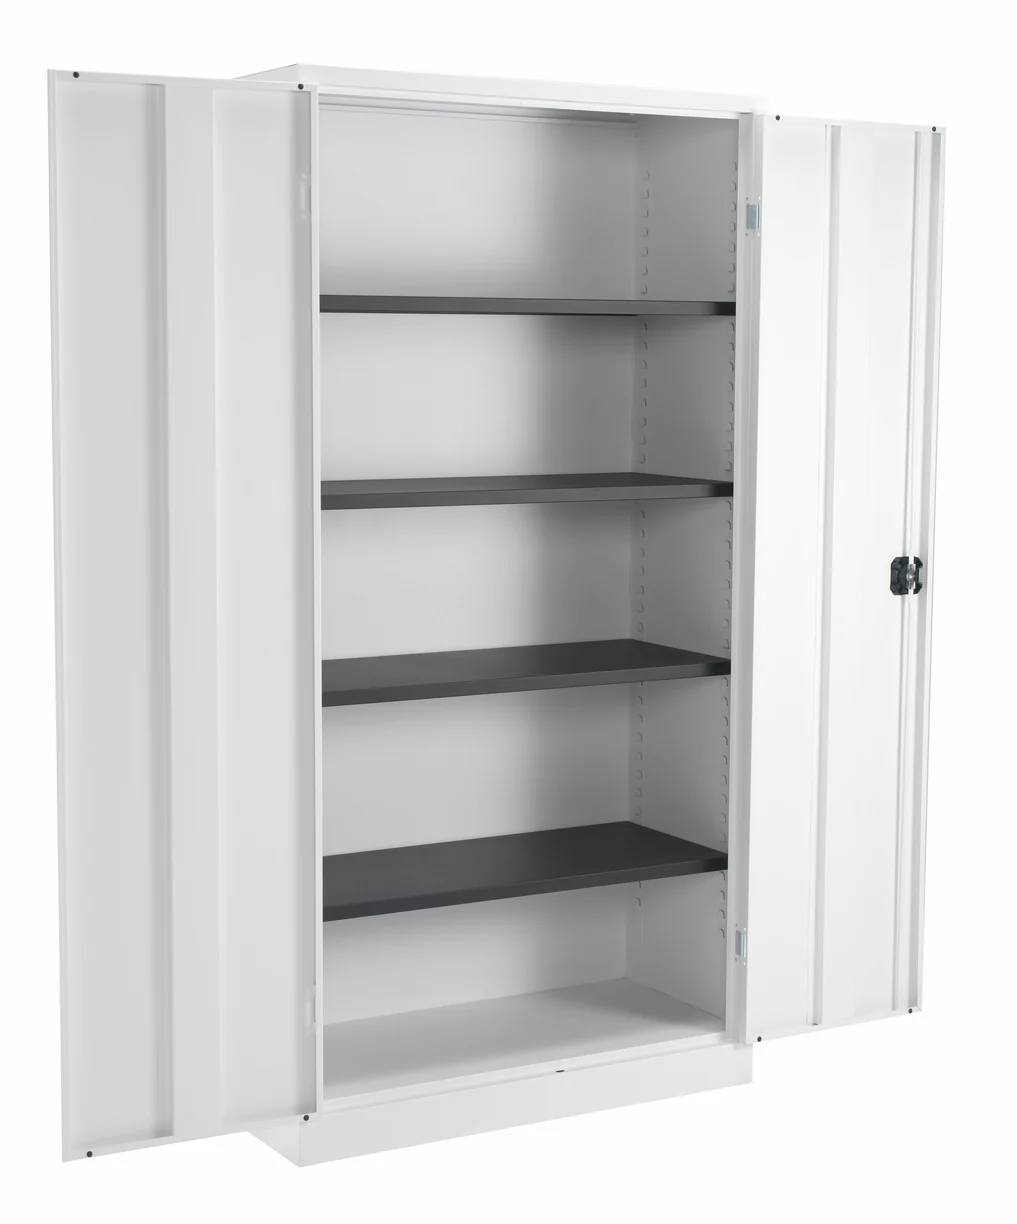 Dams steel cupboard with 3 shelves White